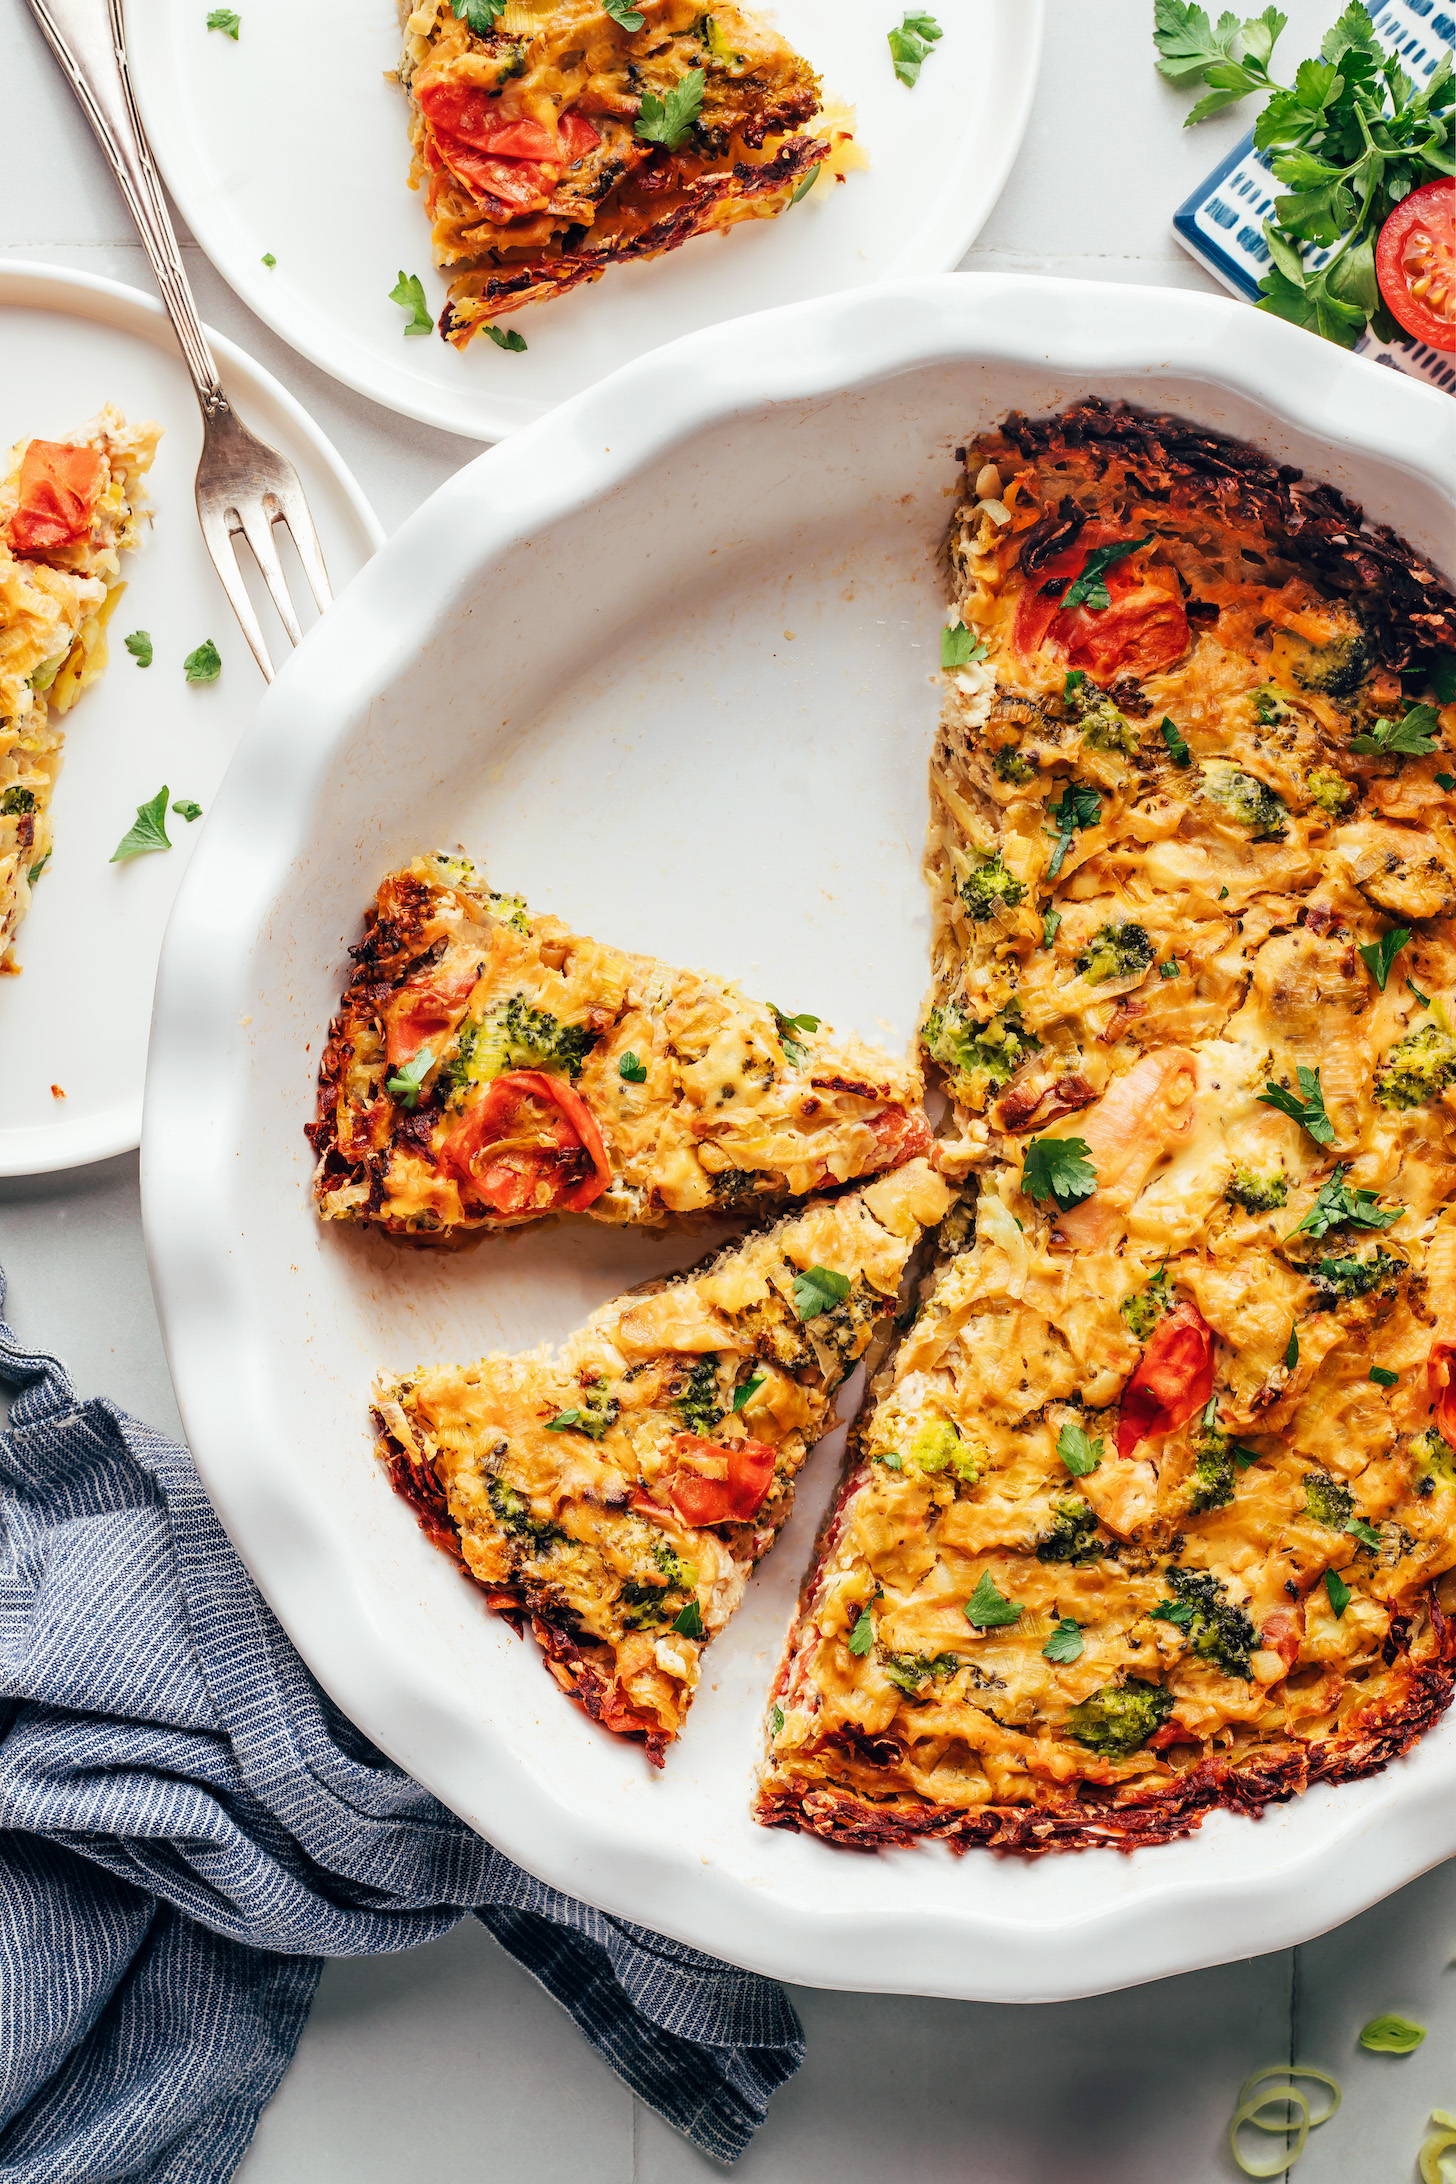 Partially sliced gluten-free vegan Tofu Quiche made with roasted veggies